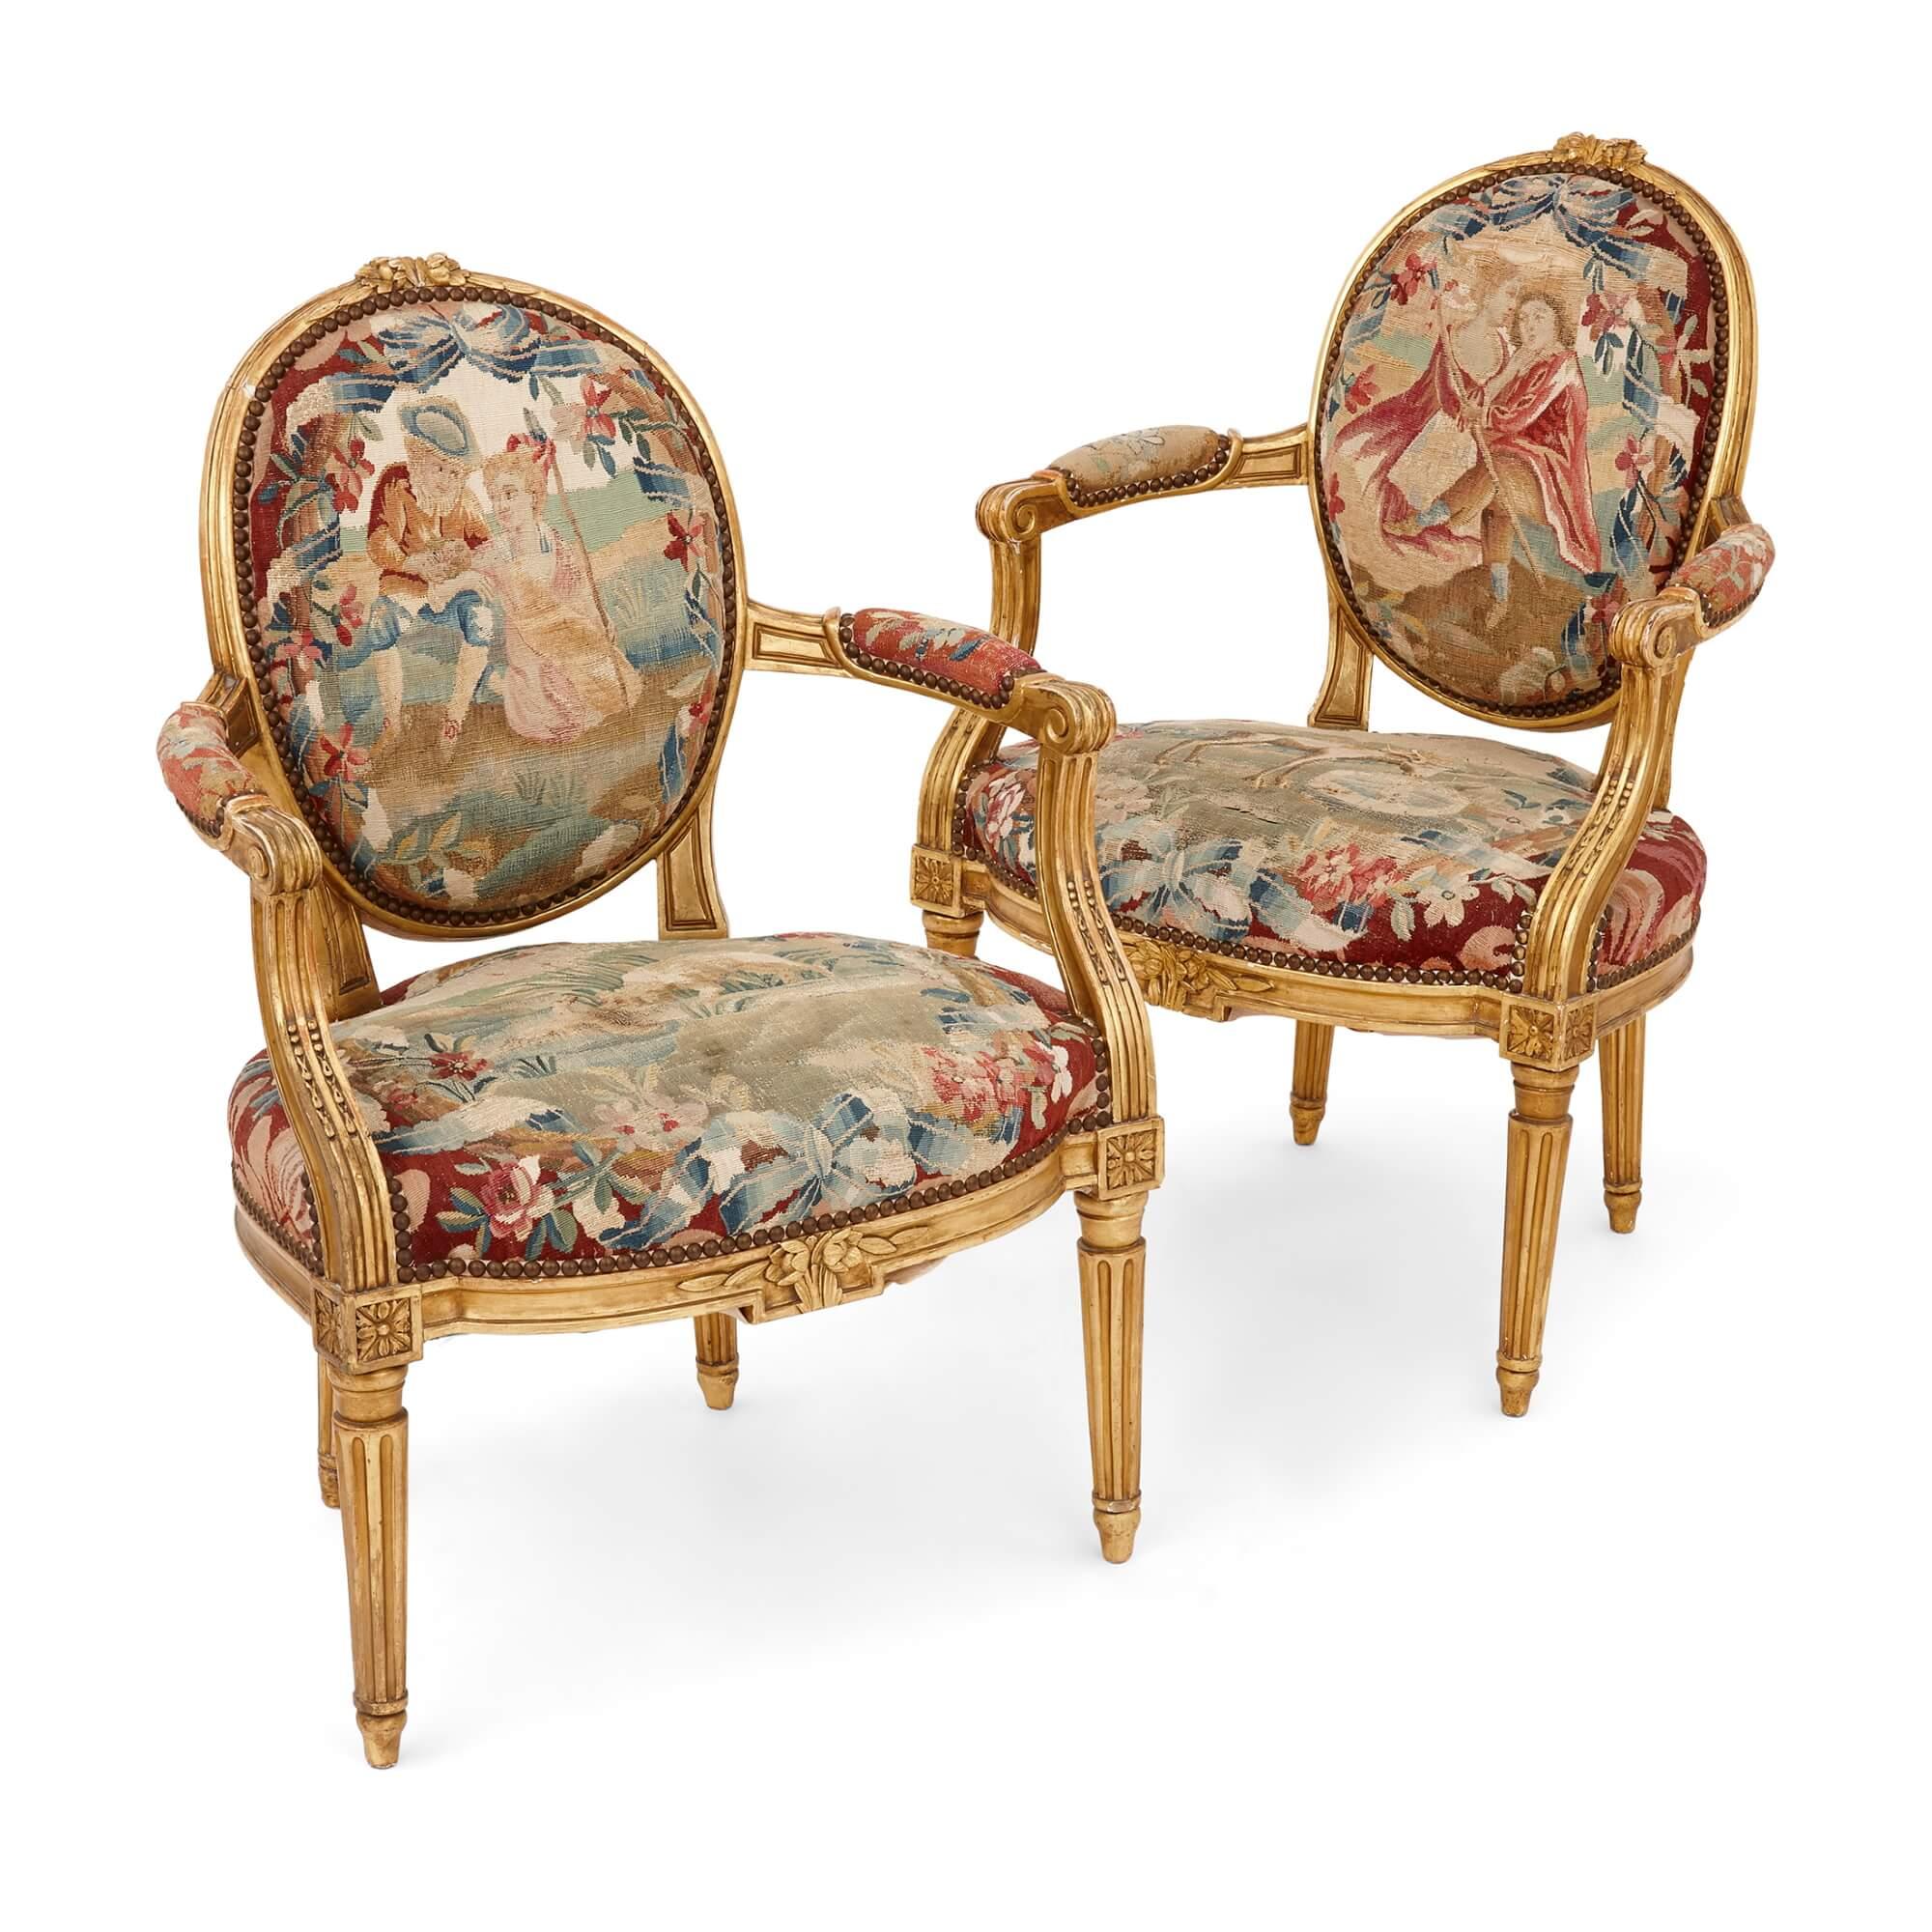 A set of six Aubusson tapestry and giltwood chairs
French, 18th and 19th Centuries
Measures: Height 87cm, width 61cm, depth 50cm

Formed of a set of six, these fine works are nineteenth century giltwood chairs, formed by combining this later